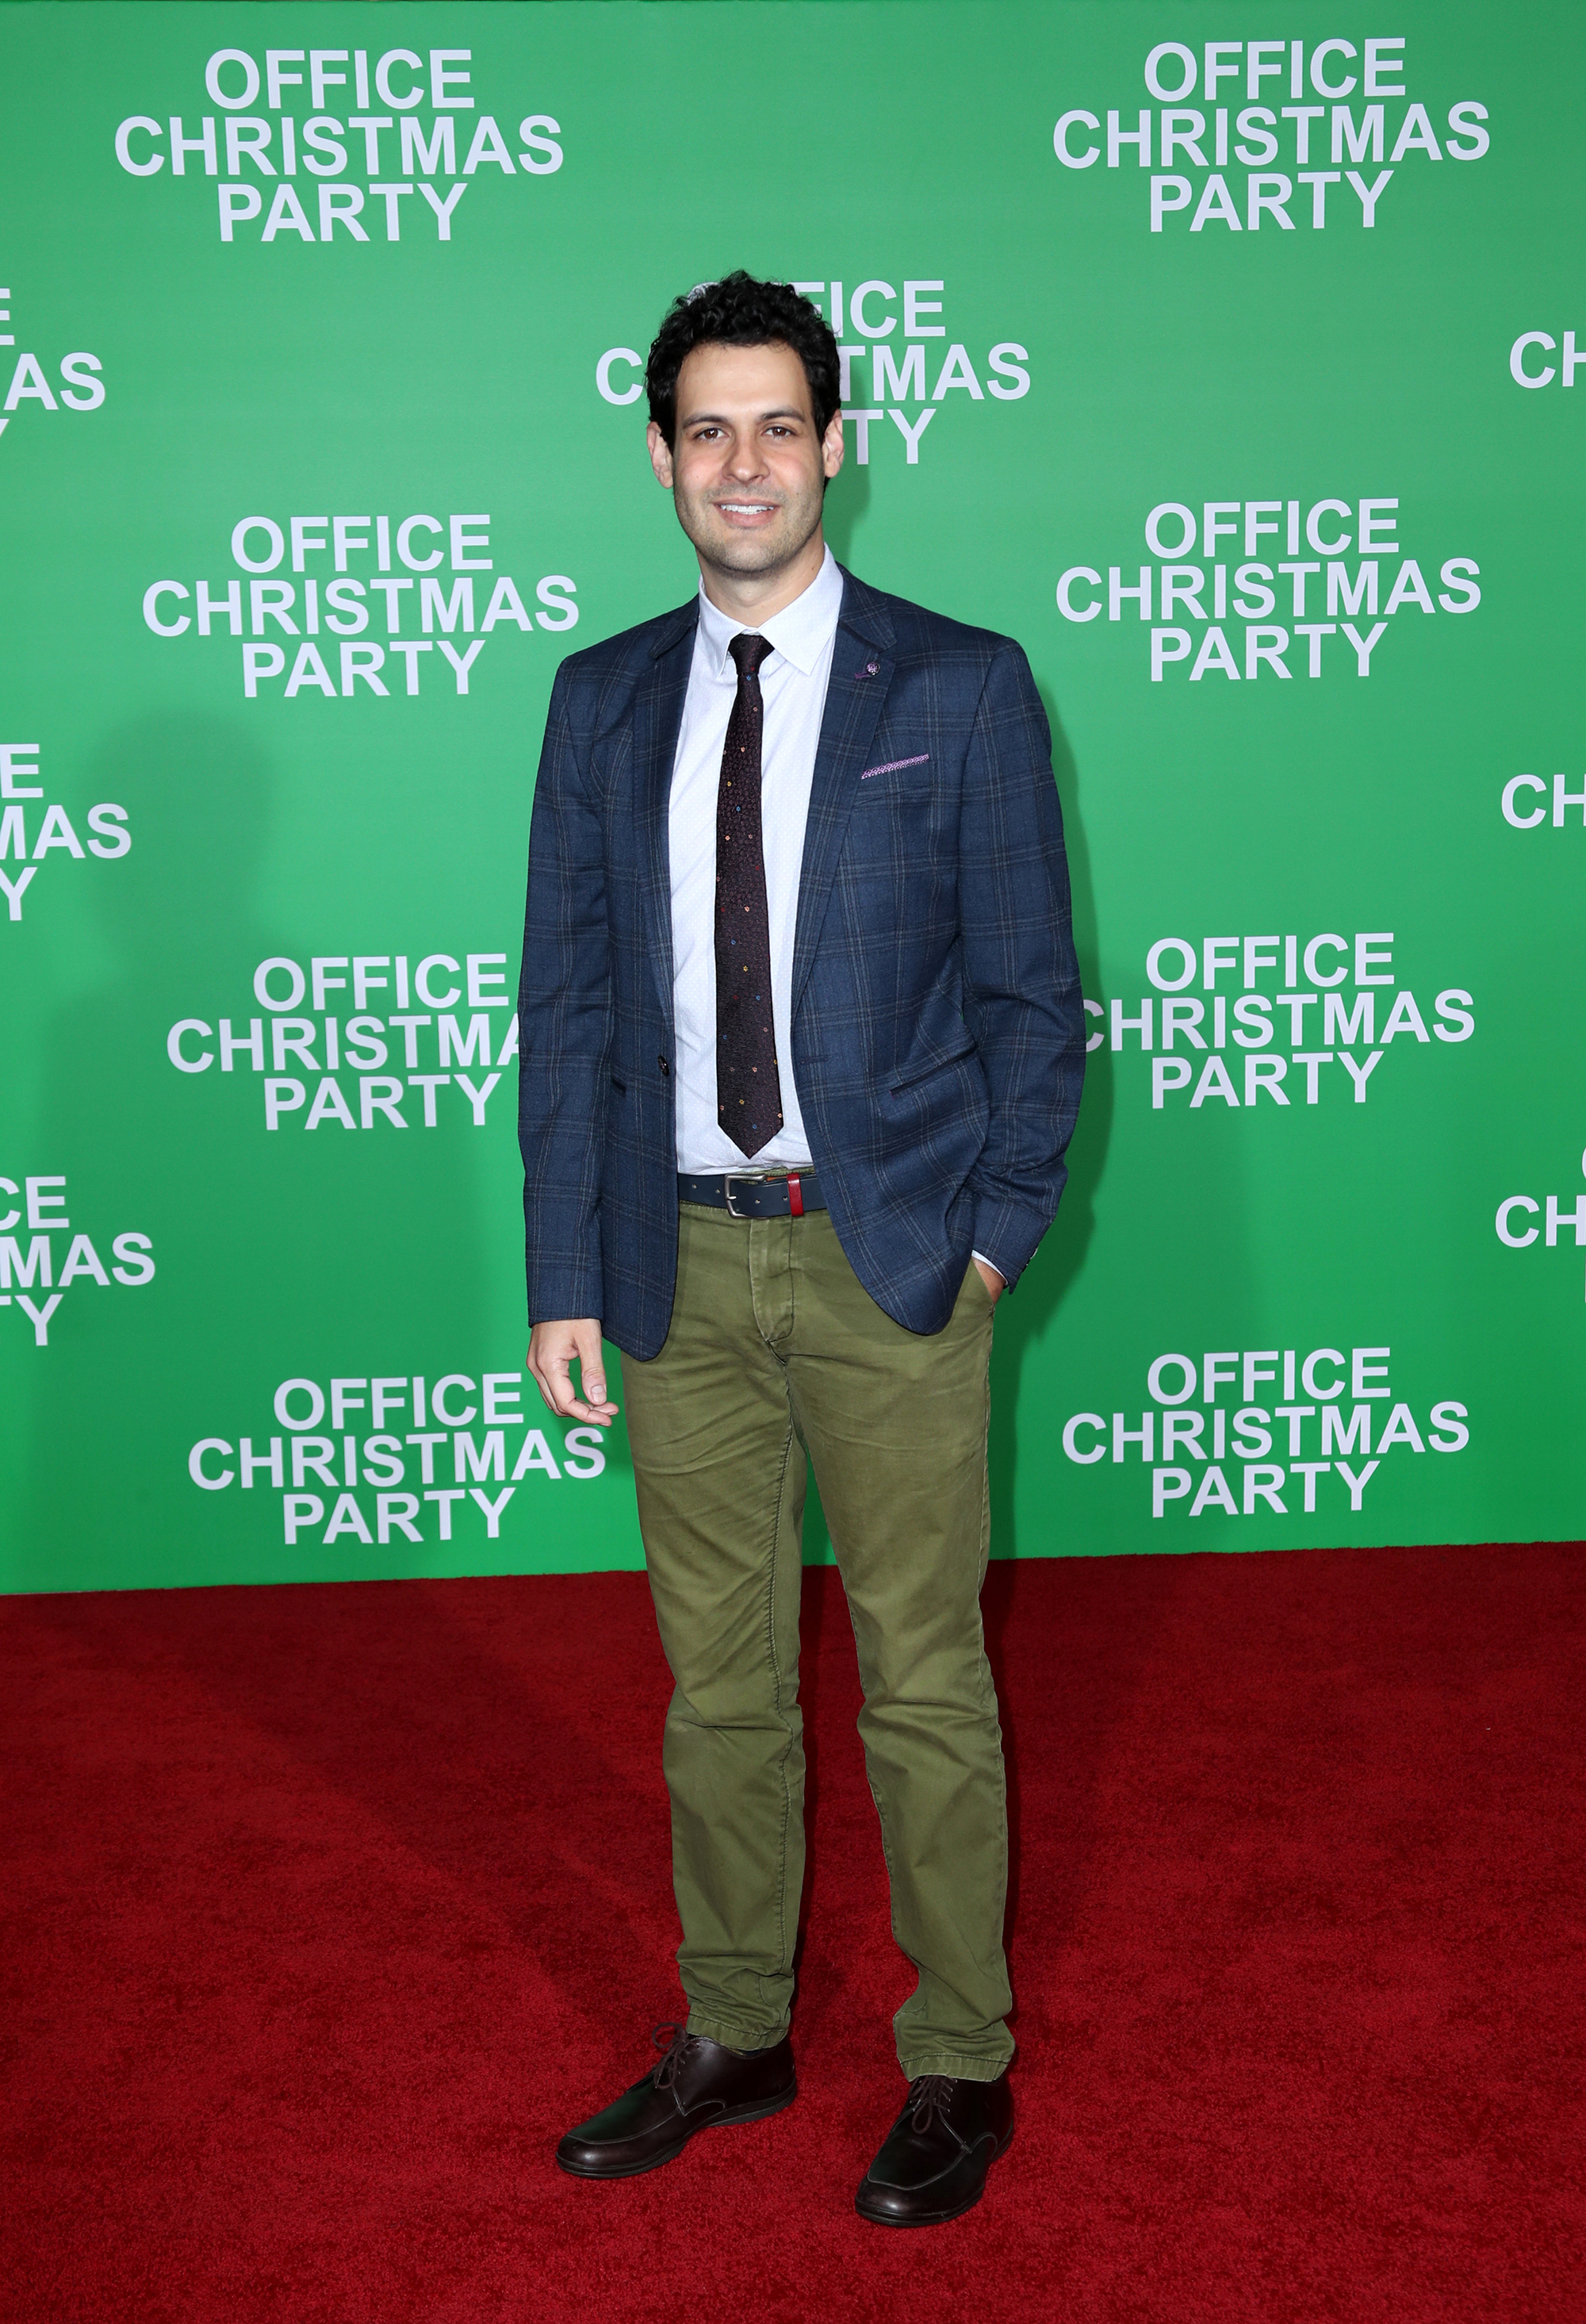 WESTWOOD, CA - DECEMBER 07:  Actor Andrew Leeds attends the LA Premiere of Paramount Pictures "Office Christmas Party" at Regency Village Theatre on December 7, 2016 in Westwood, California.  (Photo by Jonathan Leibson/Getty Images for Paramount Pictures) *** Local Caption *** Andrew Leeds